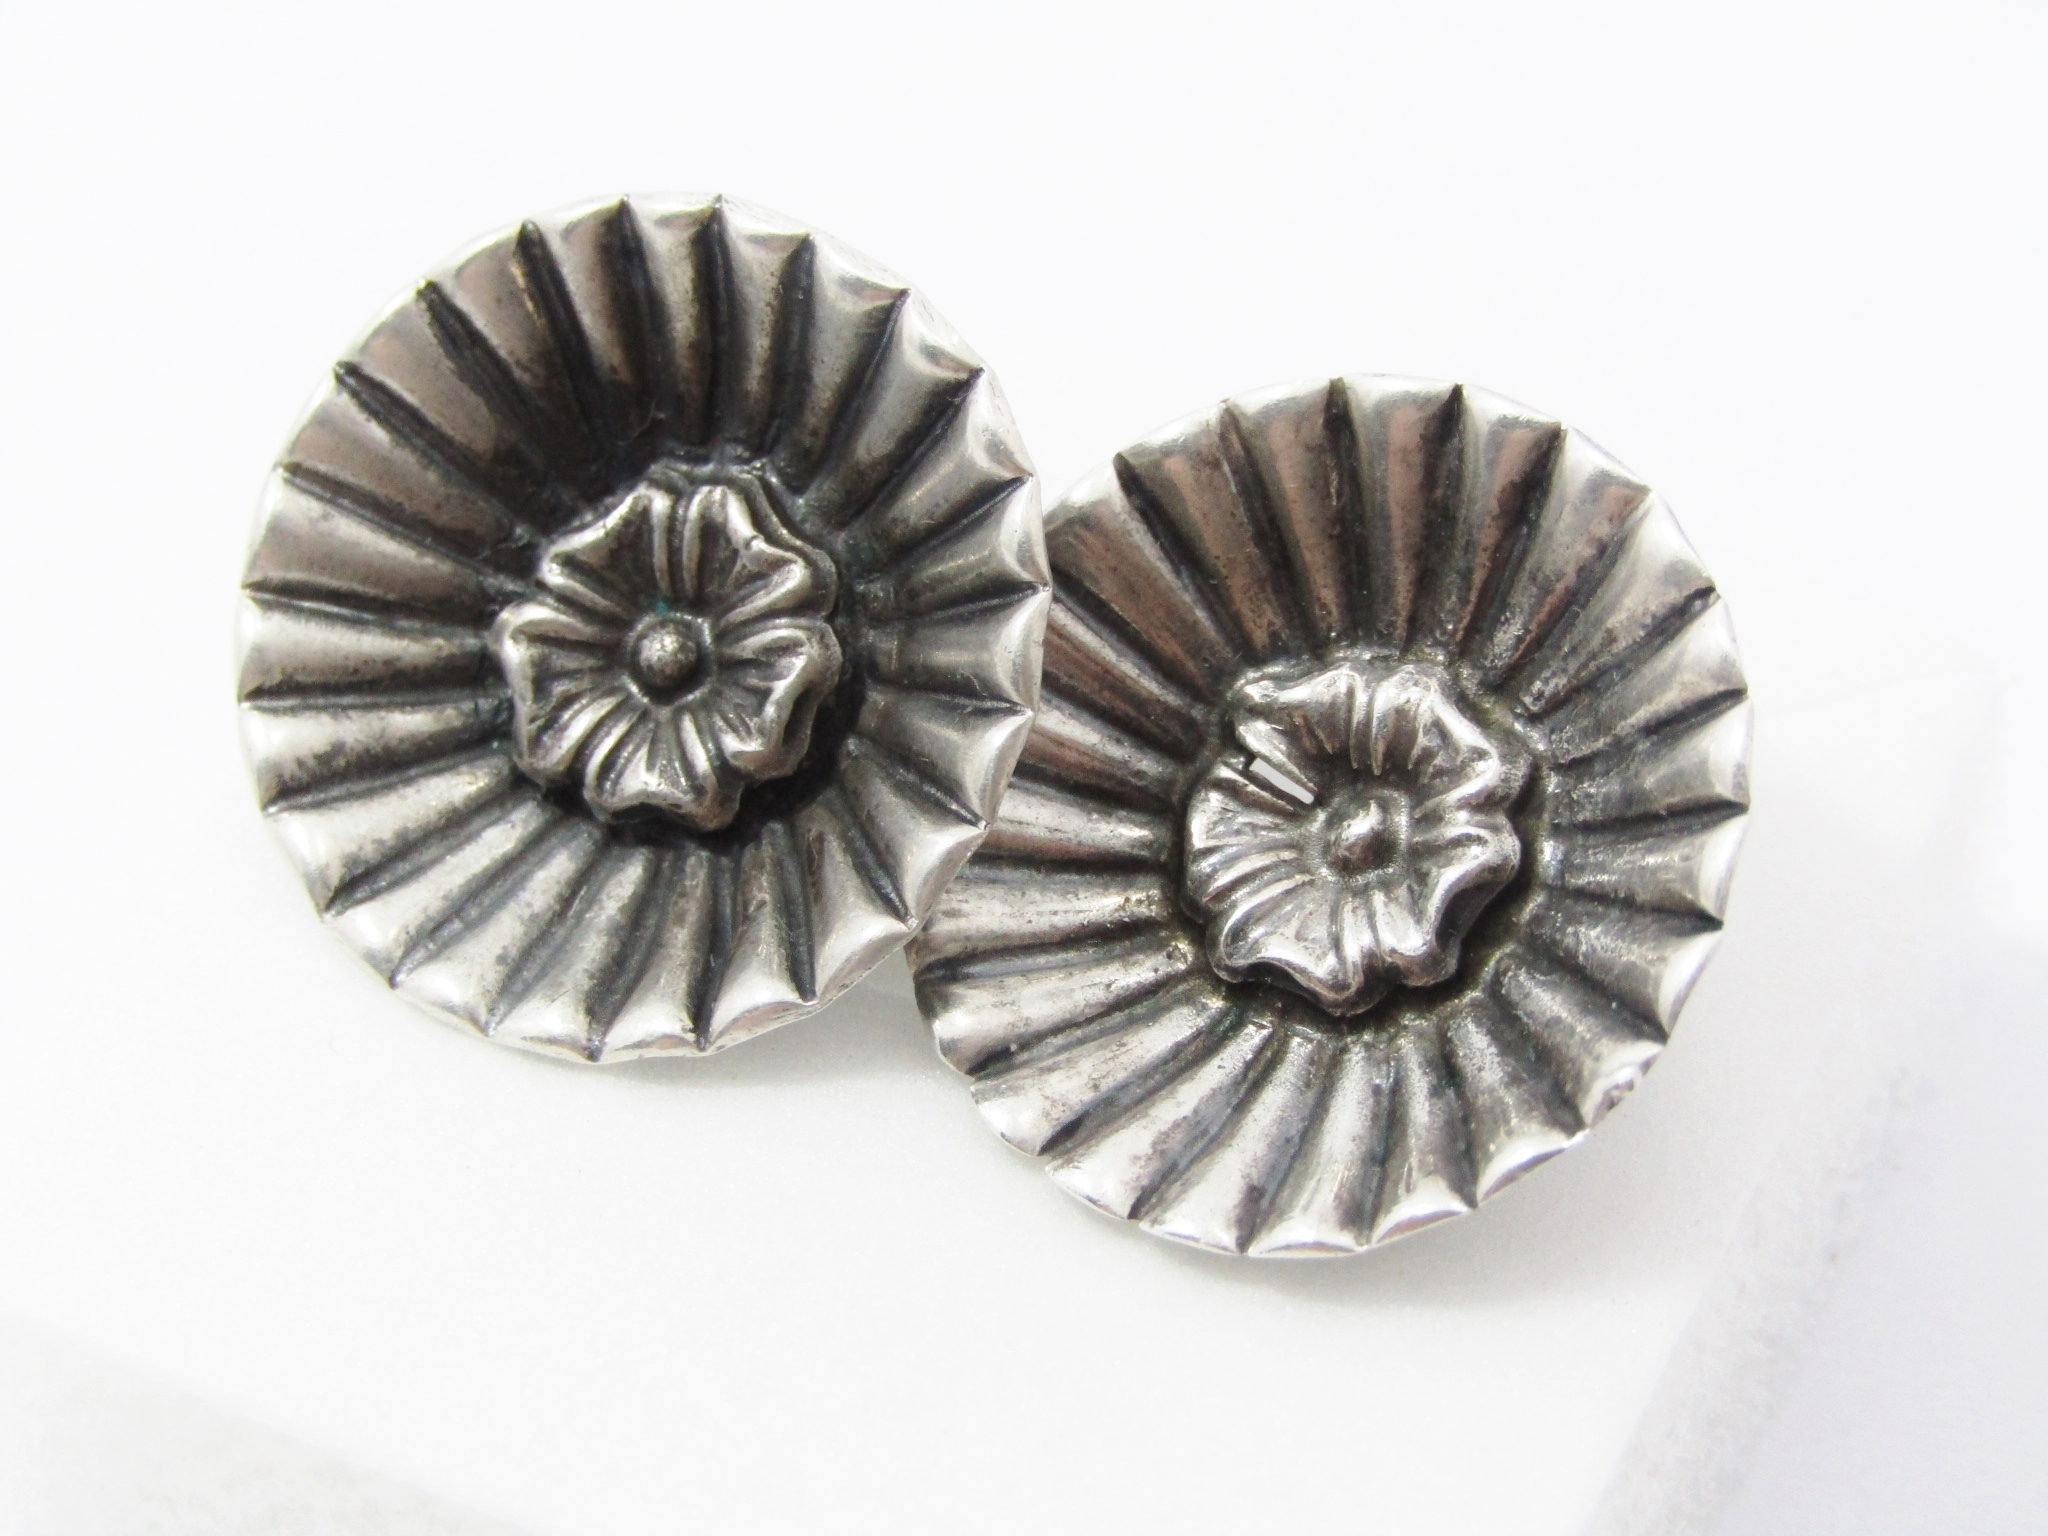 A Beautiful Candida Flower Design Clip On Earrings in Sterling Silver.